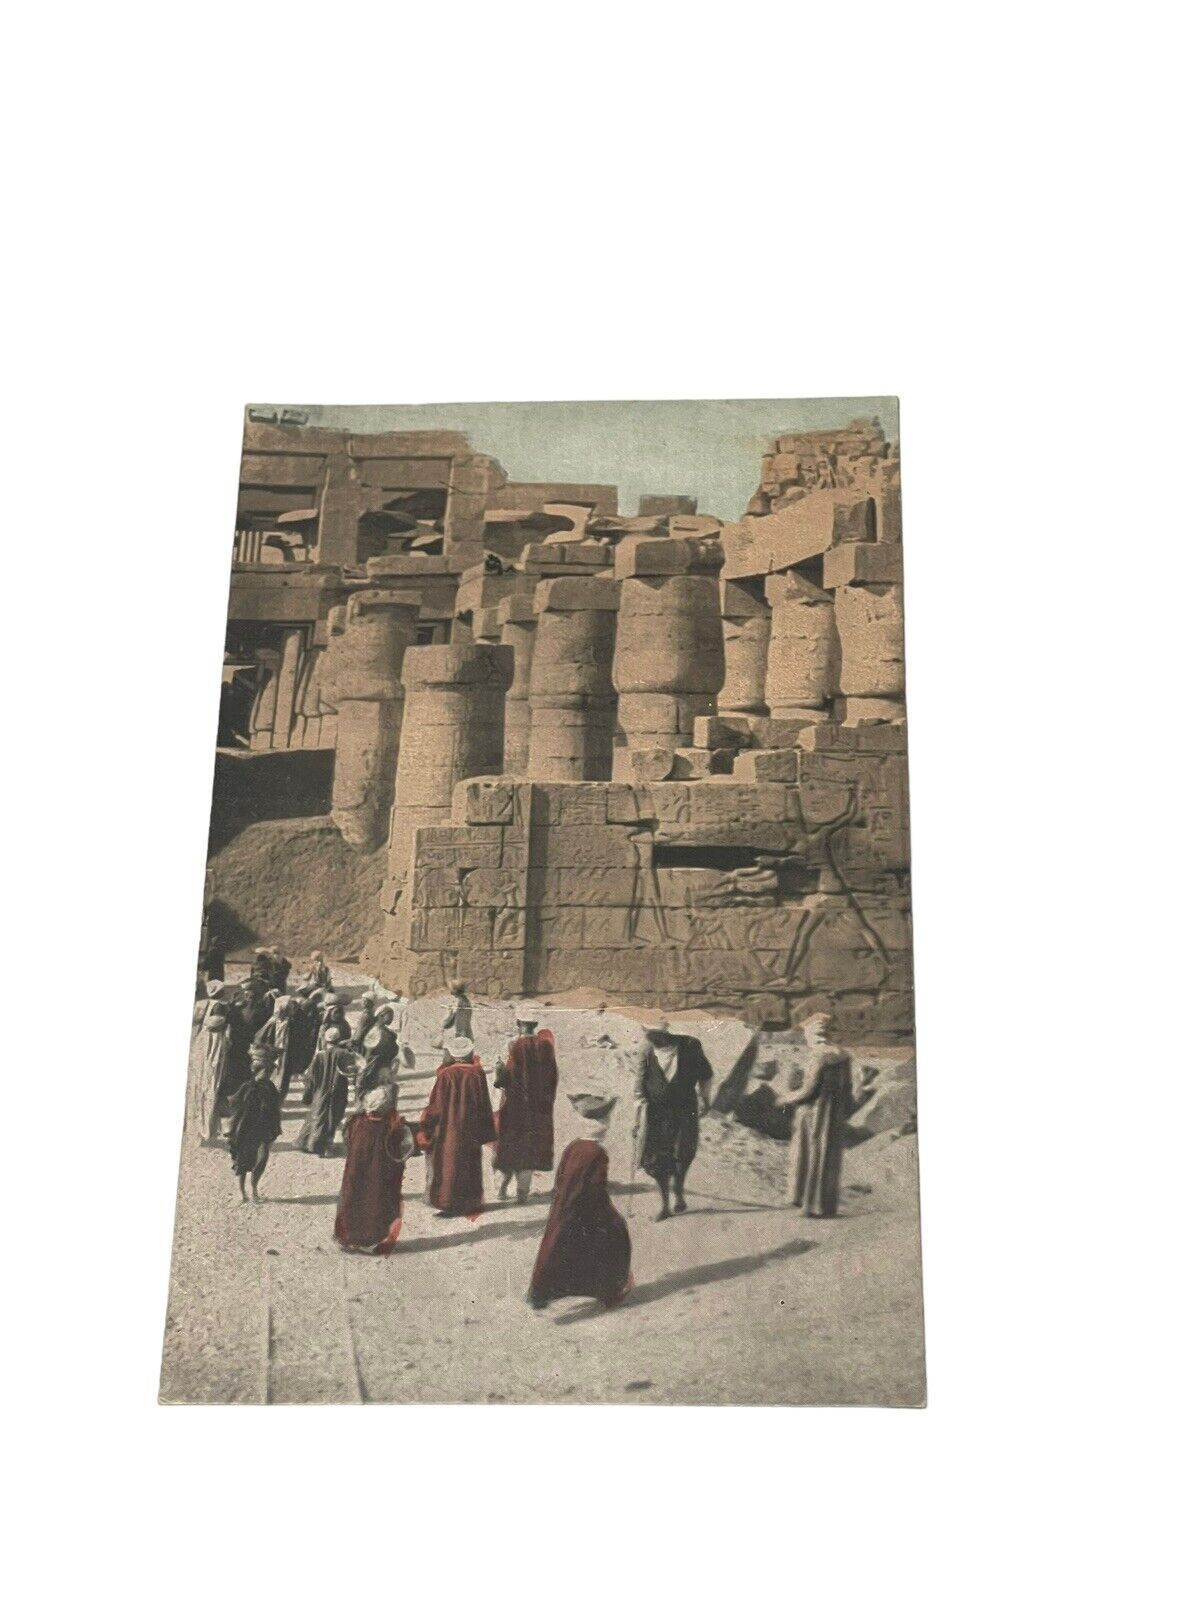 Early 1900s Postcard Laborers Excavating the Temple of Ammon Karnak Luxor Egypt